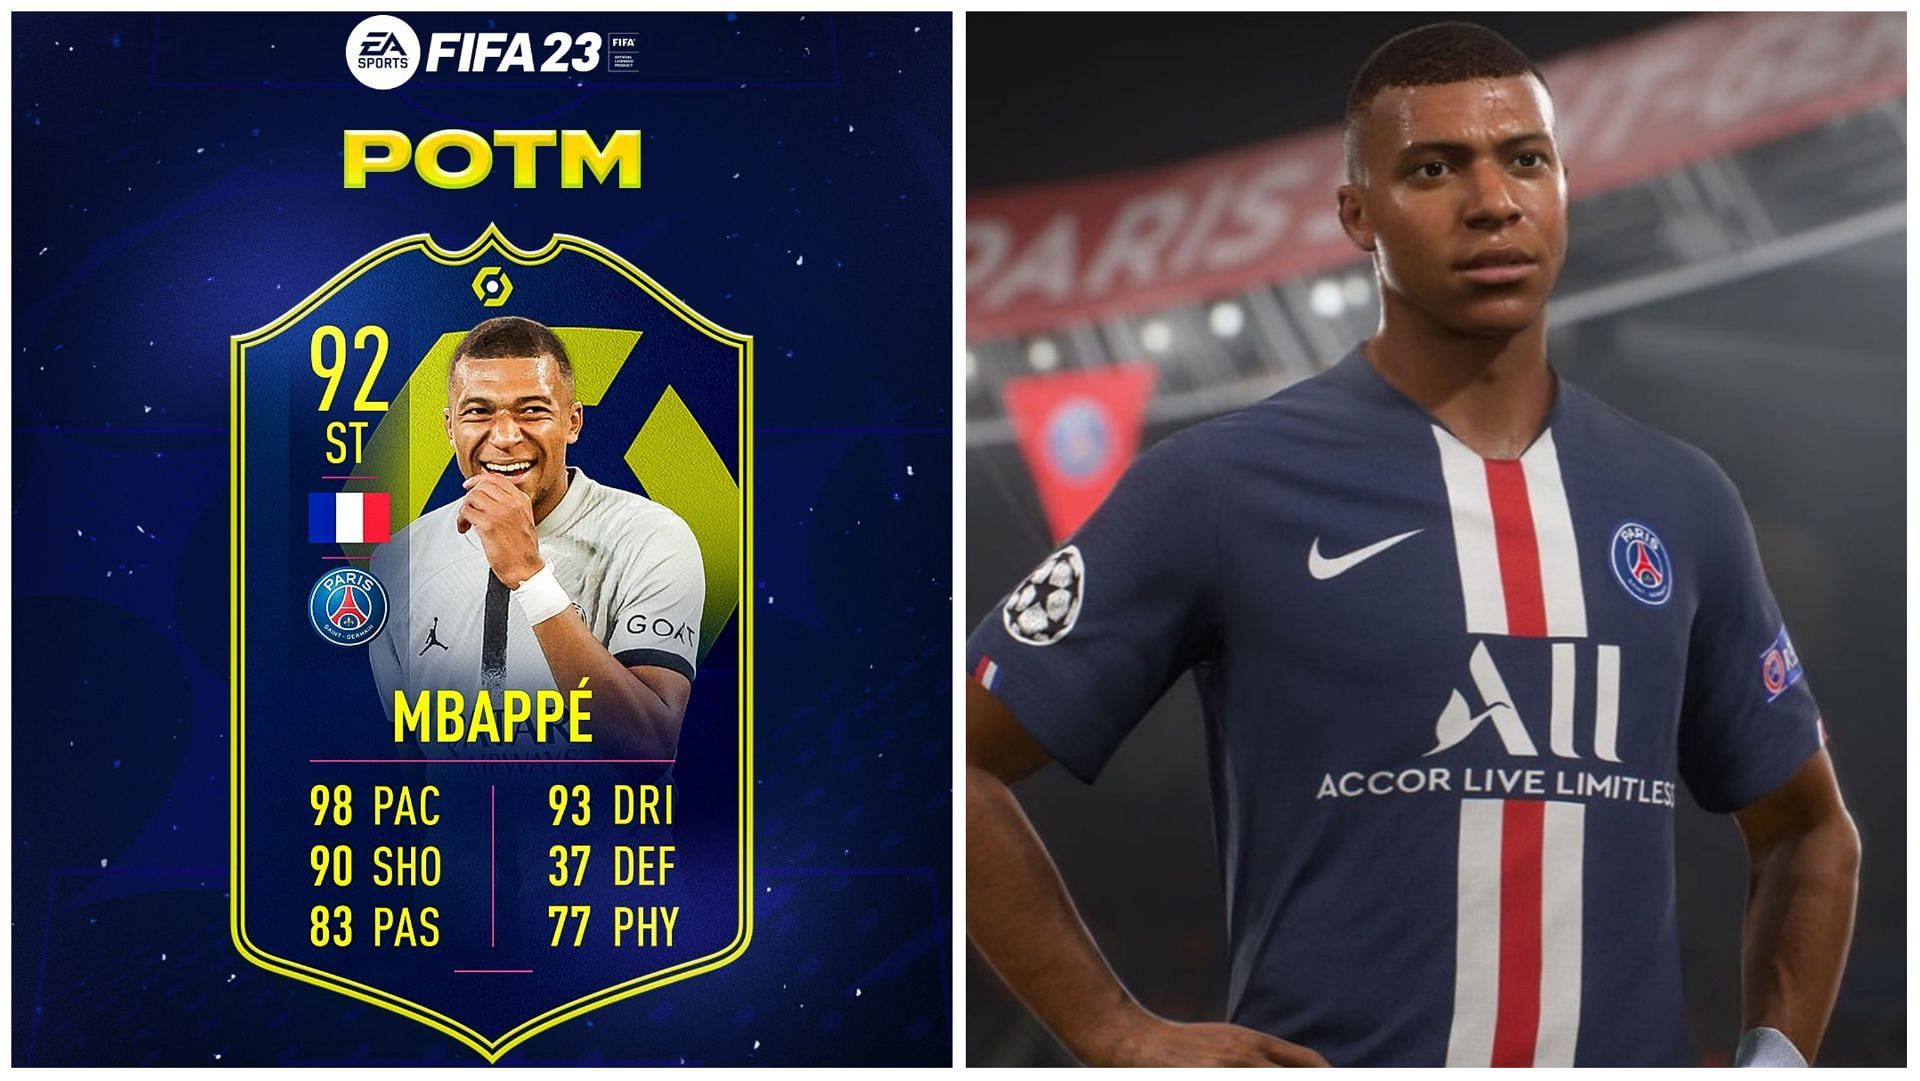 POTM Mbappe has been leaked on social media (Images via Twitter/FUT Sheriff and EA Sports)